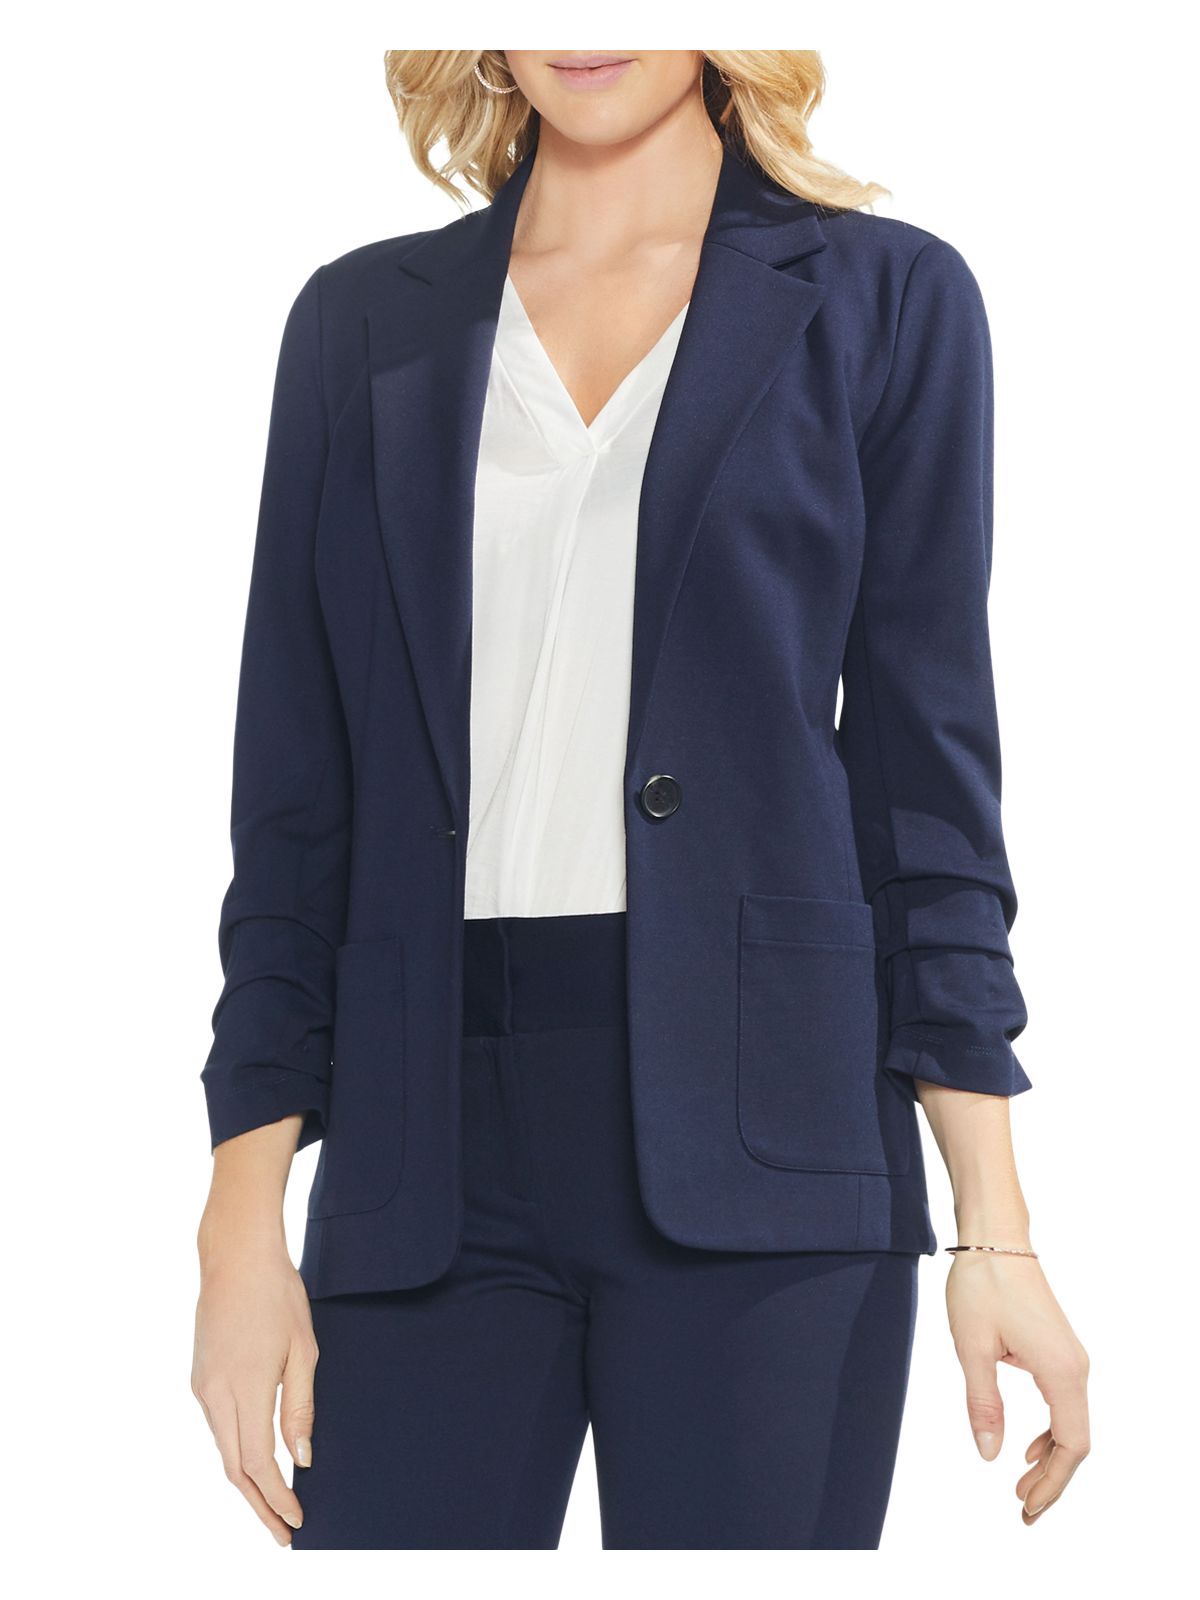 VINCE CAMUTO Womens Navy Pocketed Ruched 3/4 Sleeve Notched Collar Button Wear To Work Blazer Jacket L